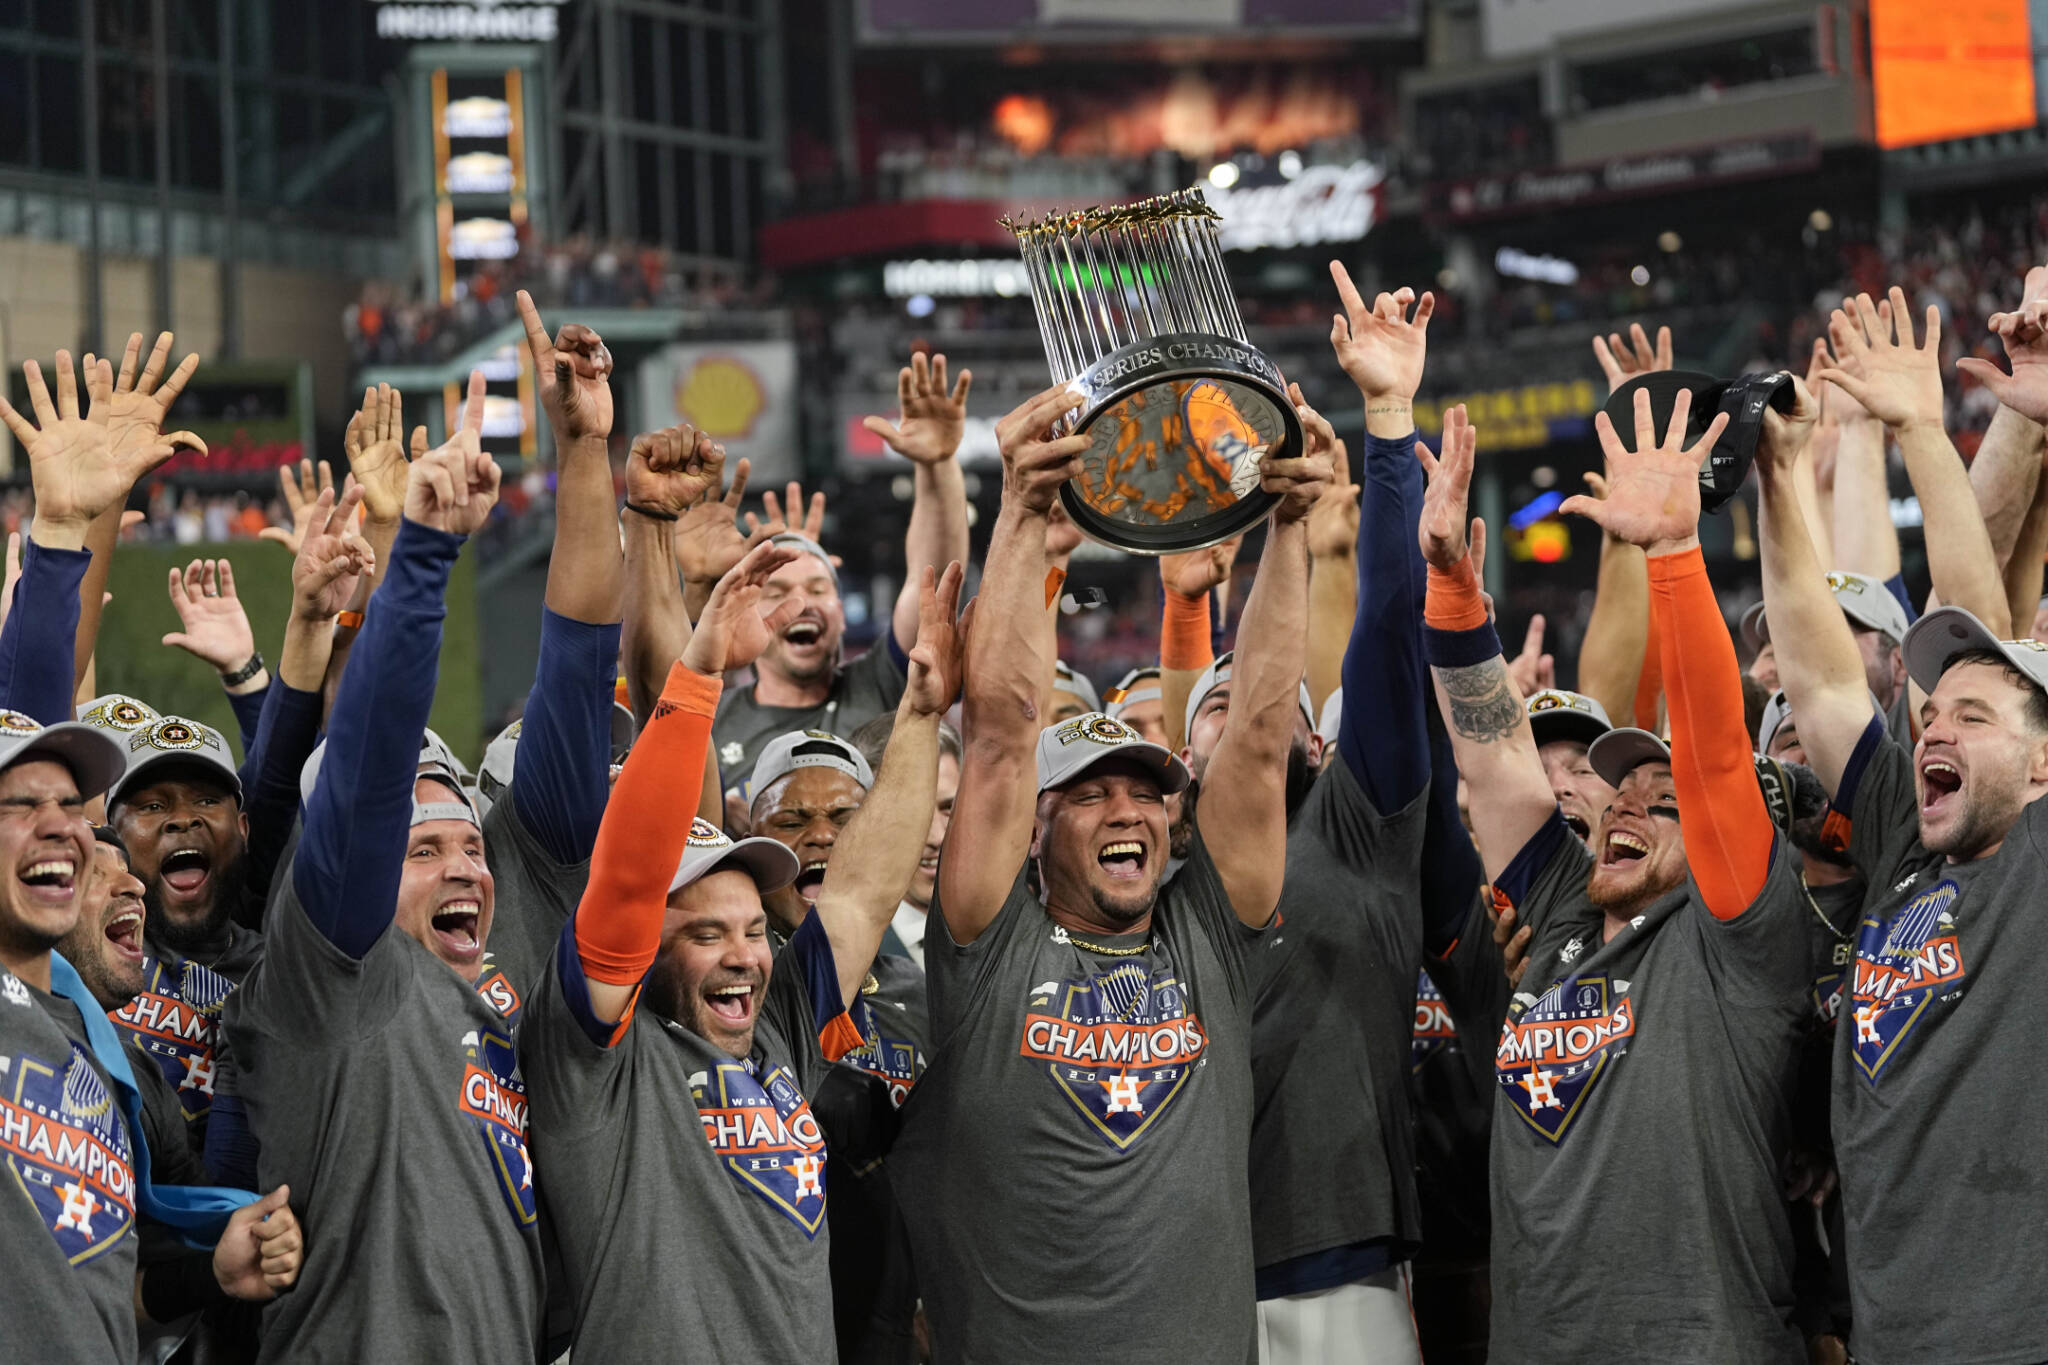 The Houston Astros celebrate their 4-1 World Series win against the Philadelphia Phillies after Game 6 on Saturday in Houston. (AP Photo/David J. Phillip)